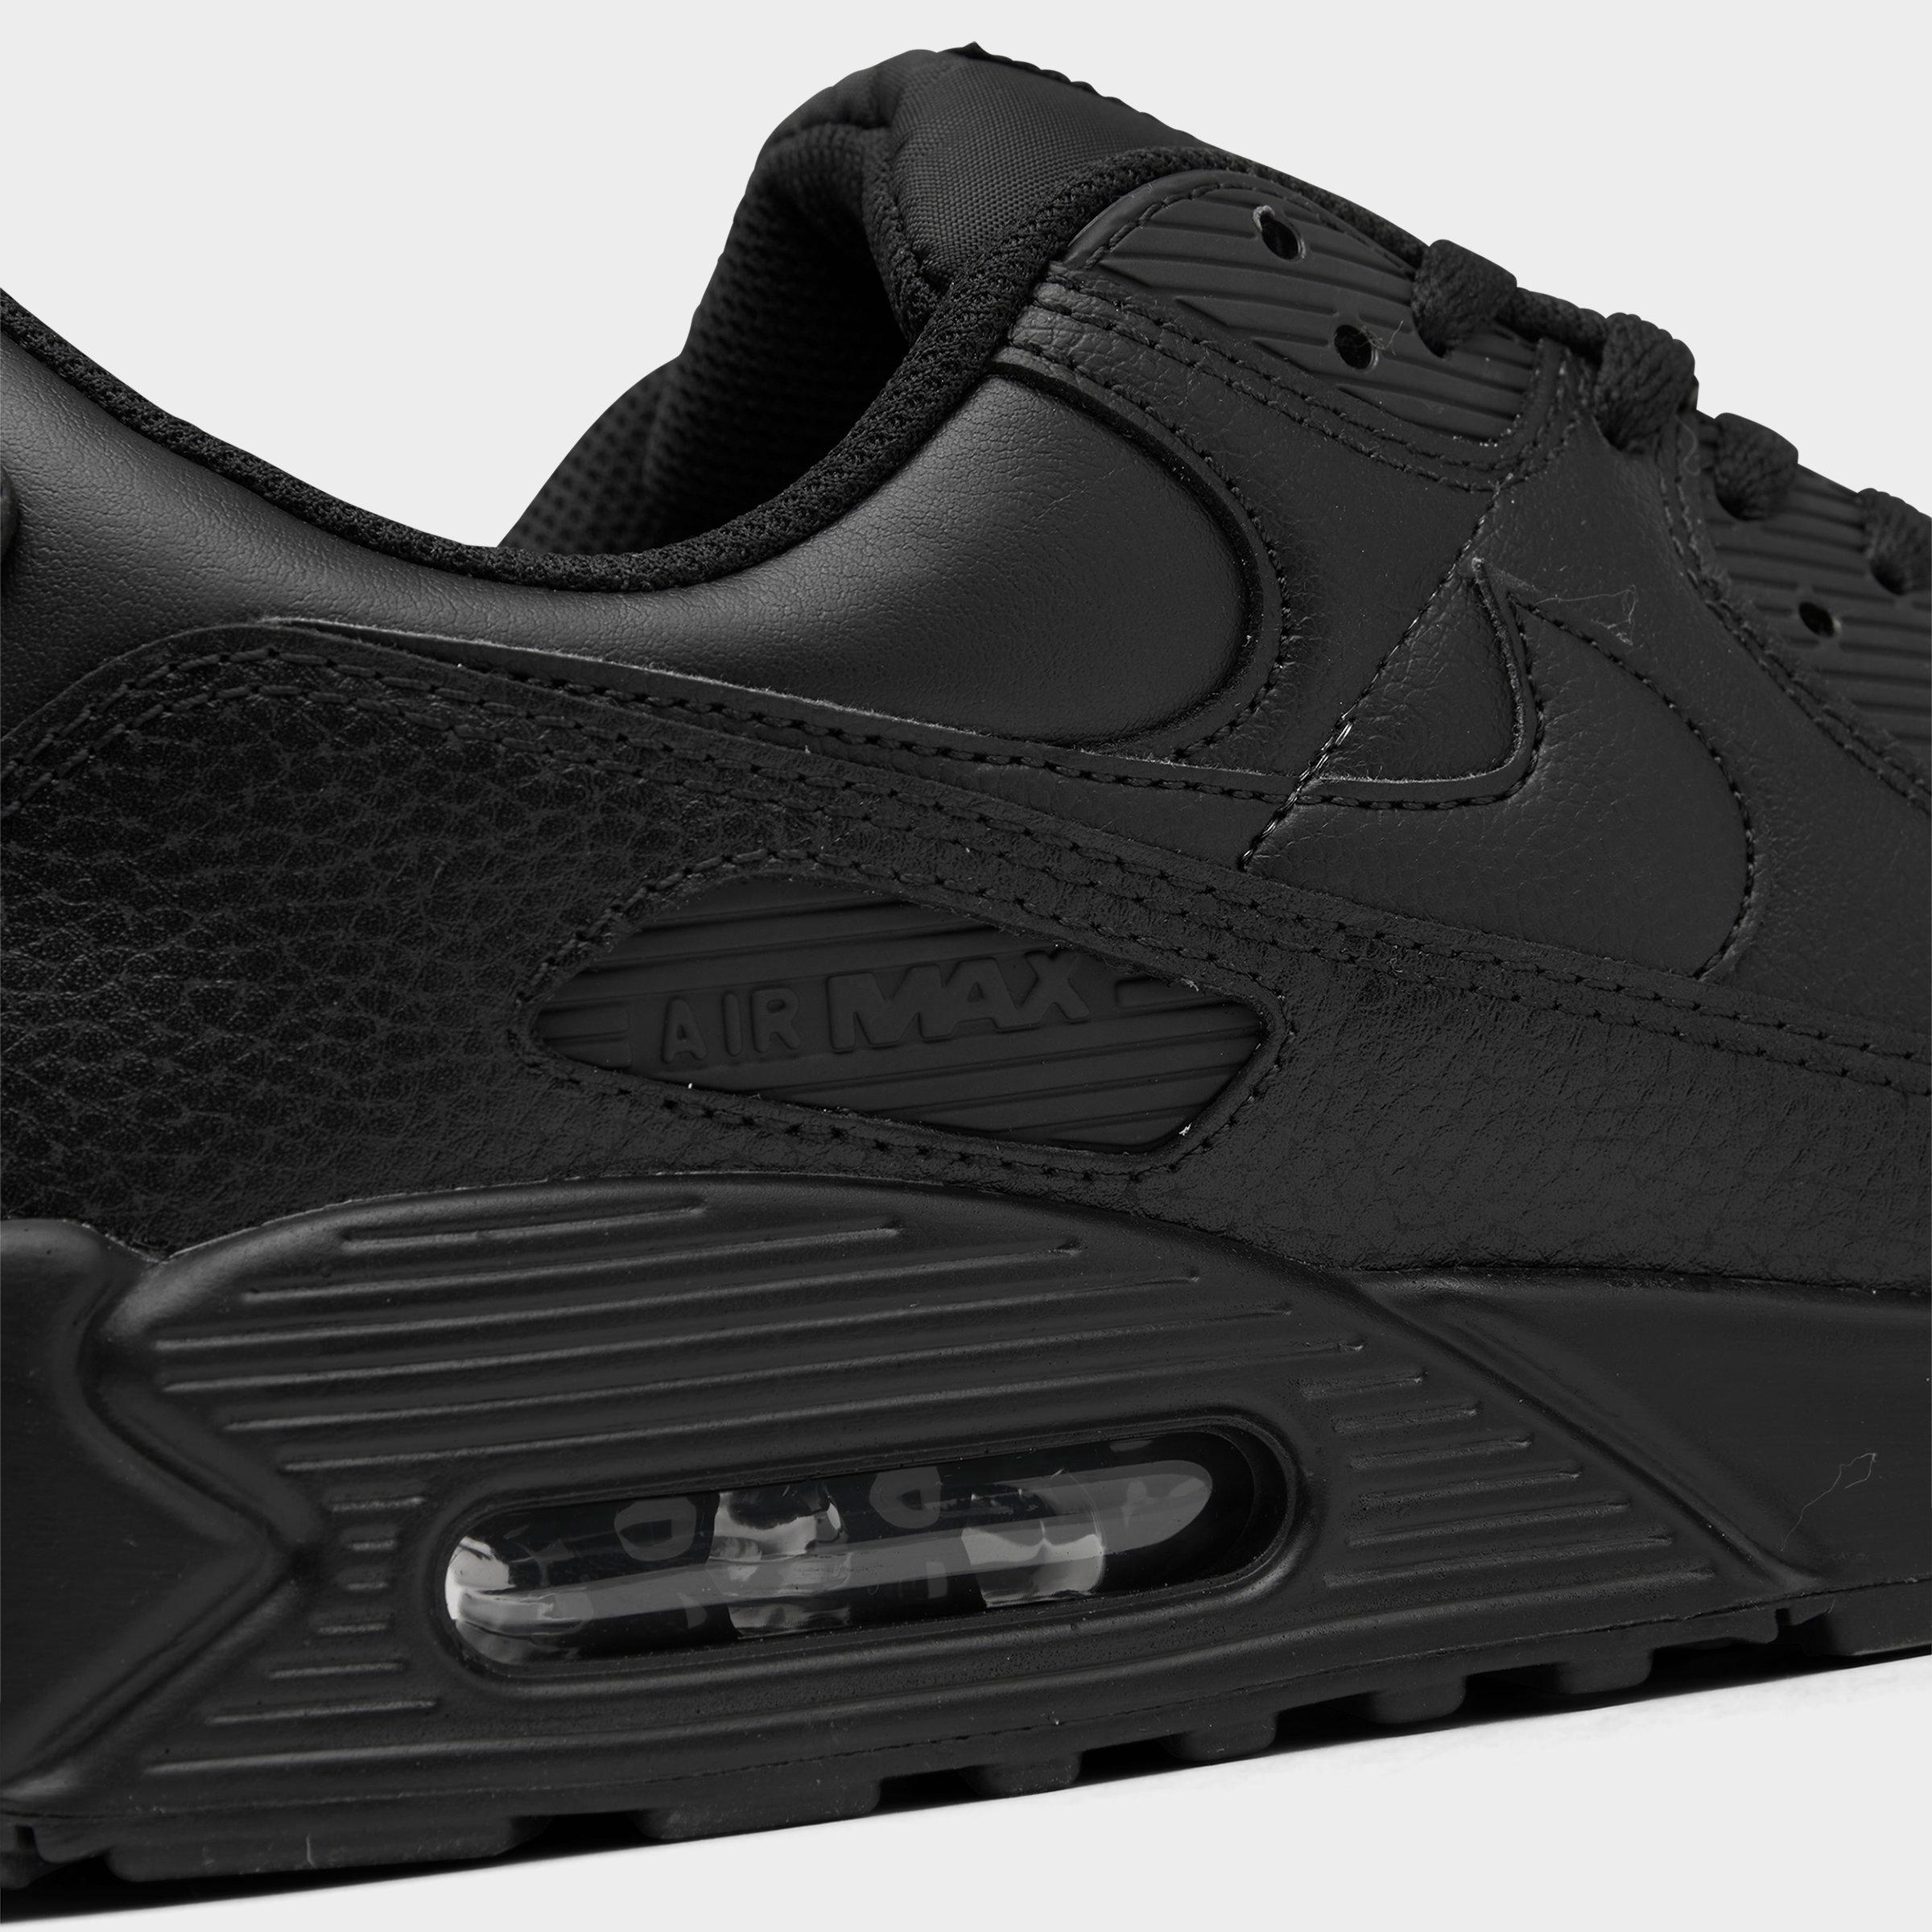 Men's Nike Air Max 90 Leather Casual 